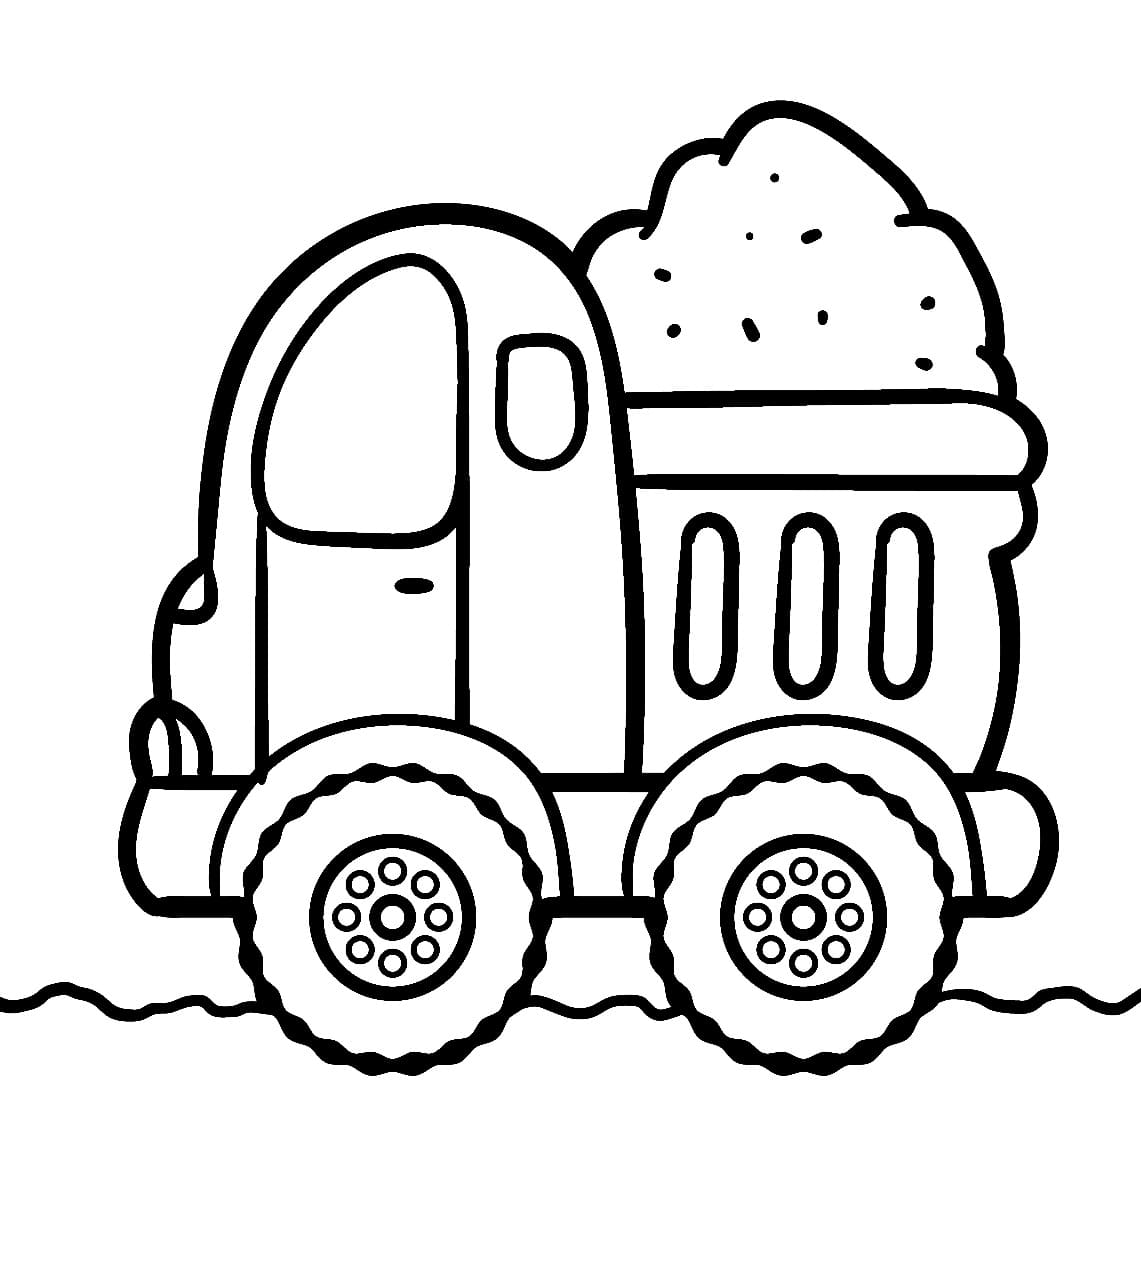 Joli Camion Benne coloring page